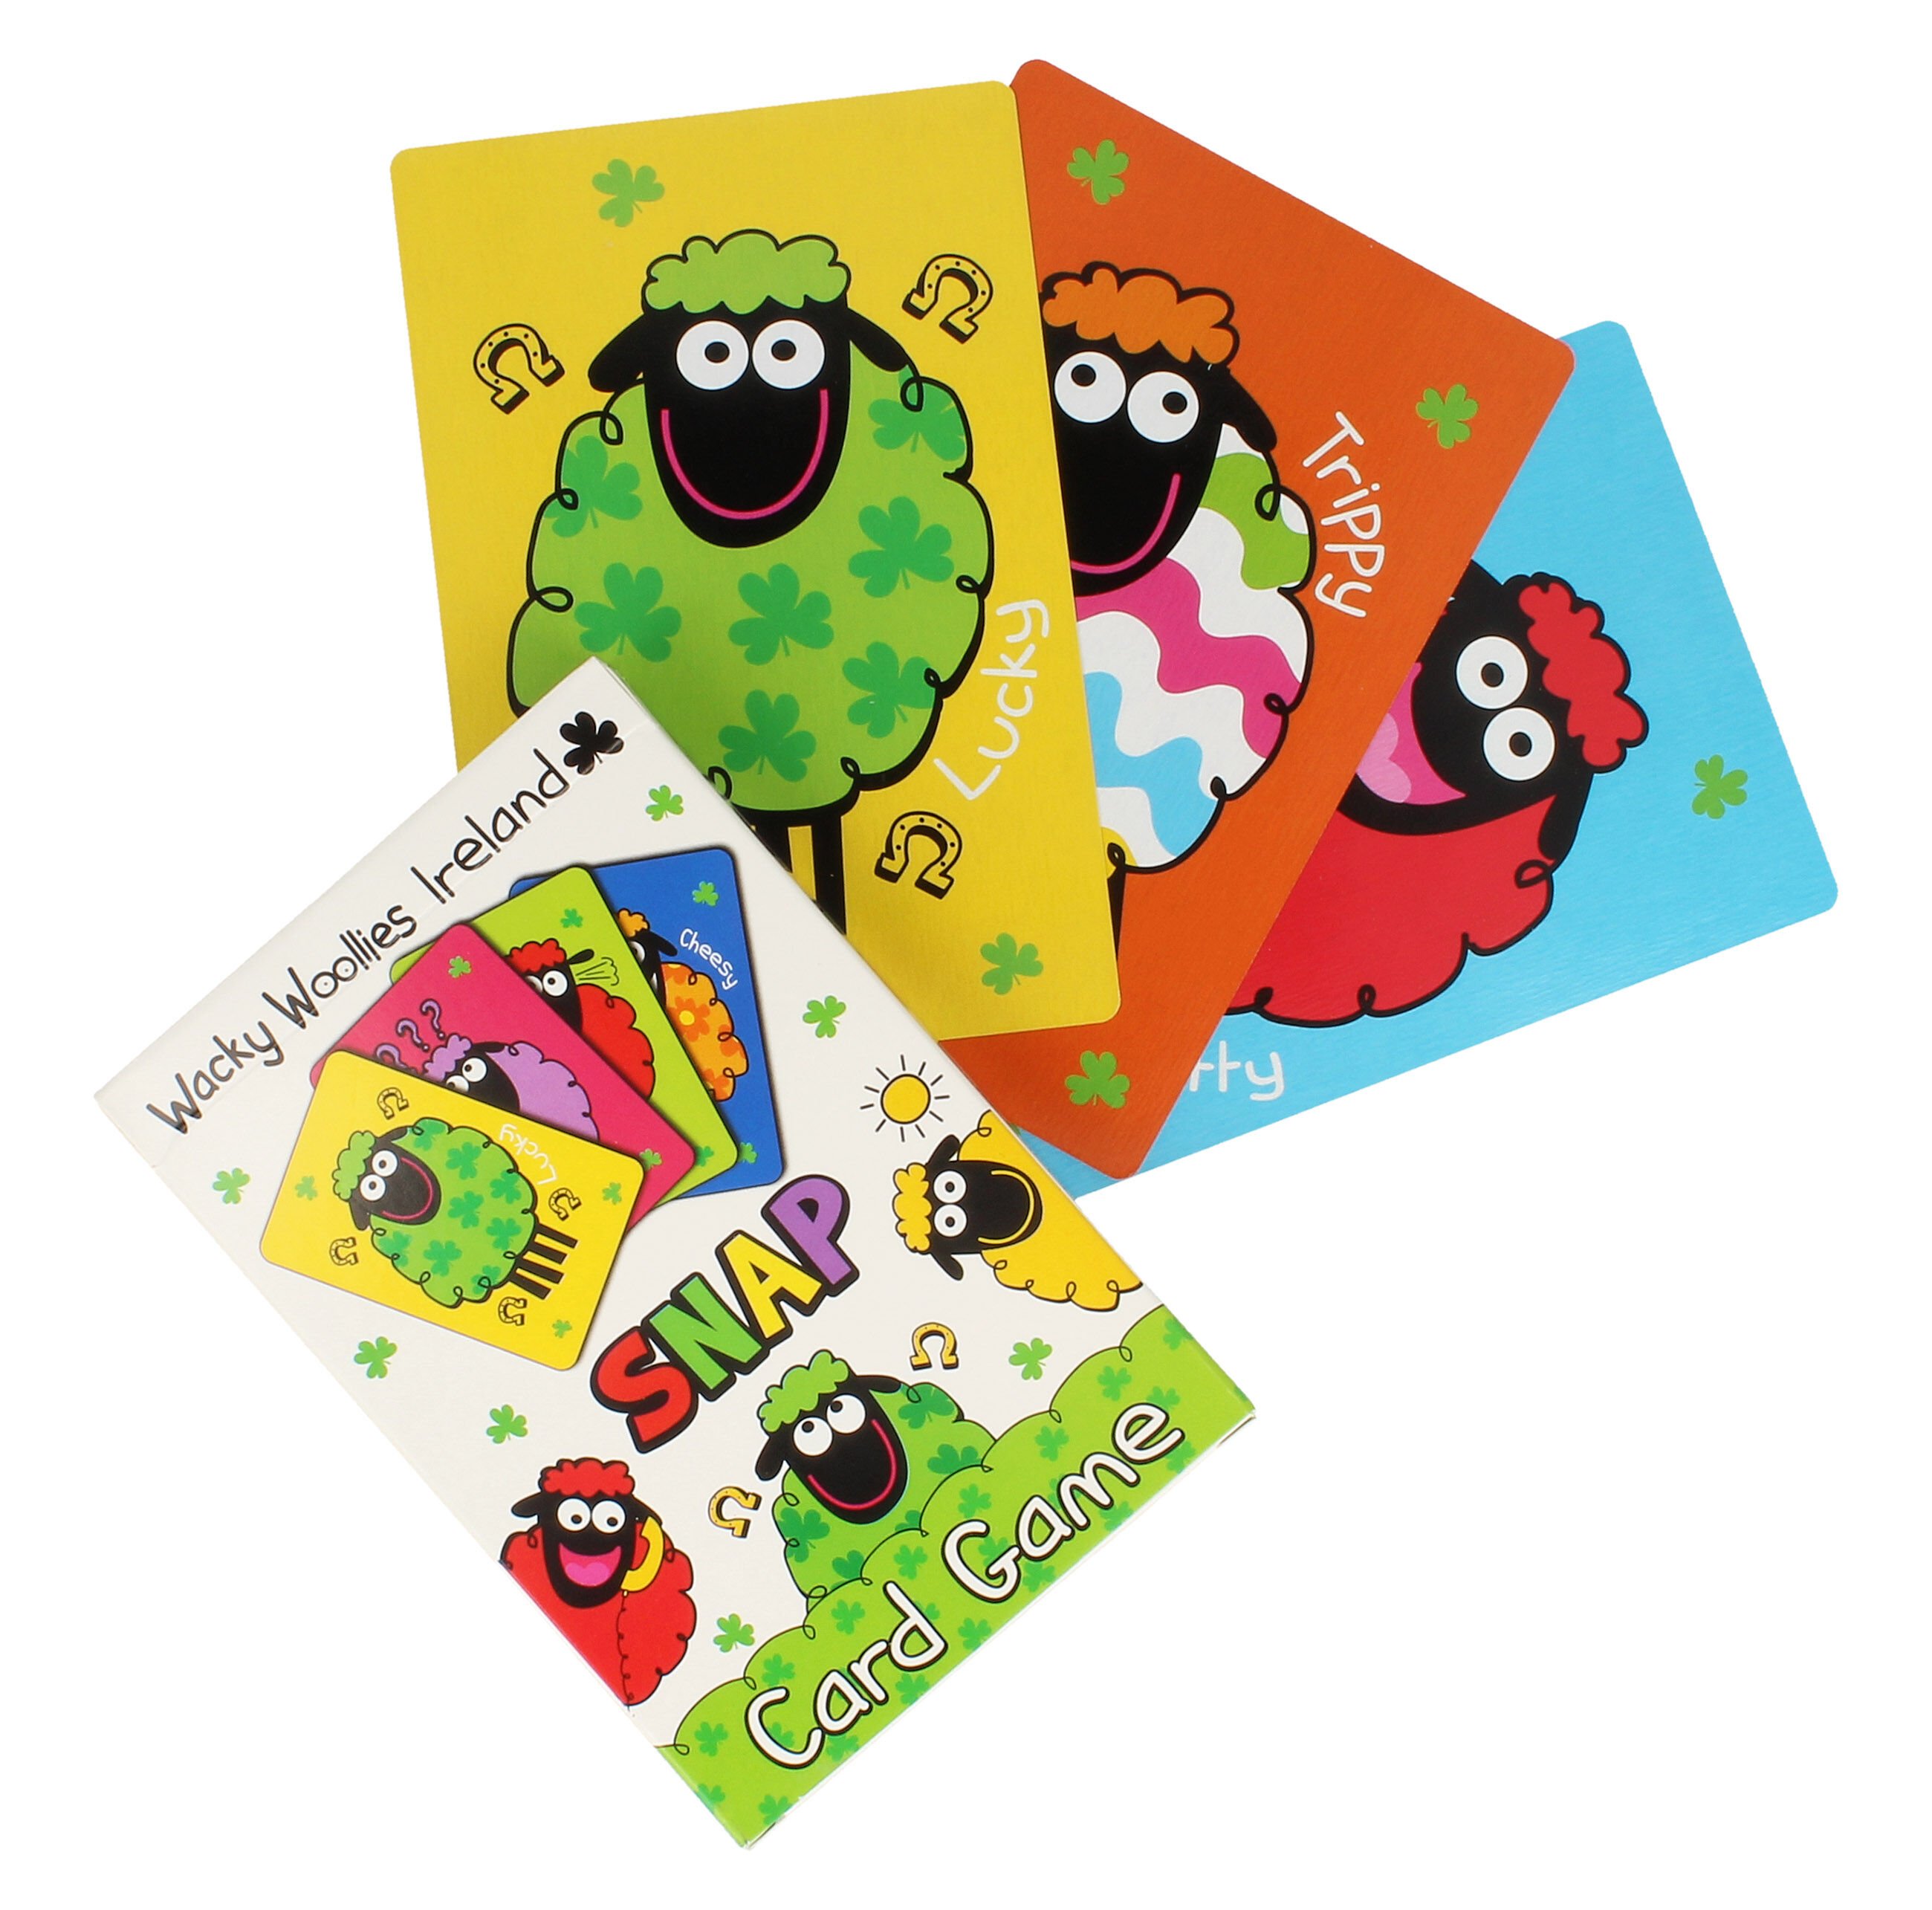 buy-wacky-woollies-ireland-designed-snap-card-game-with-coloured-sheep